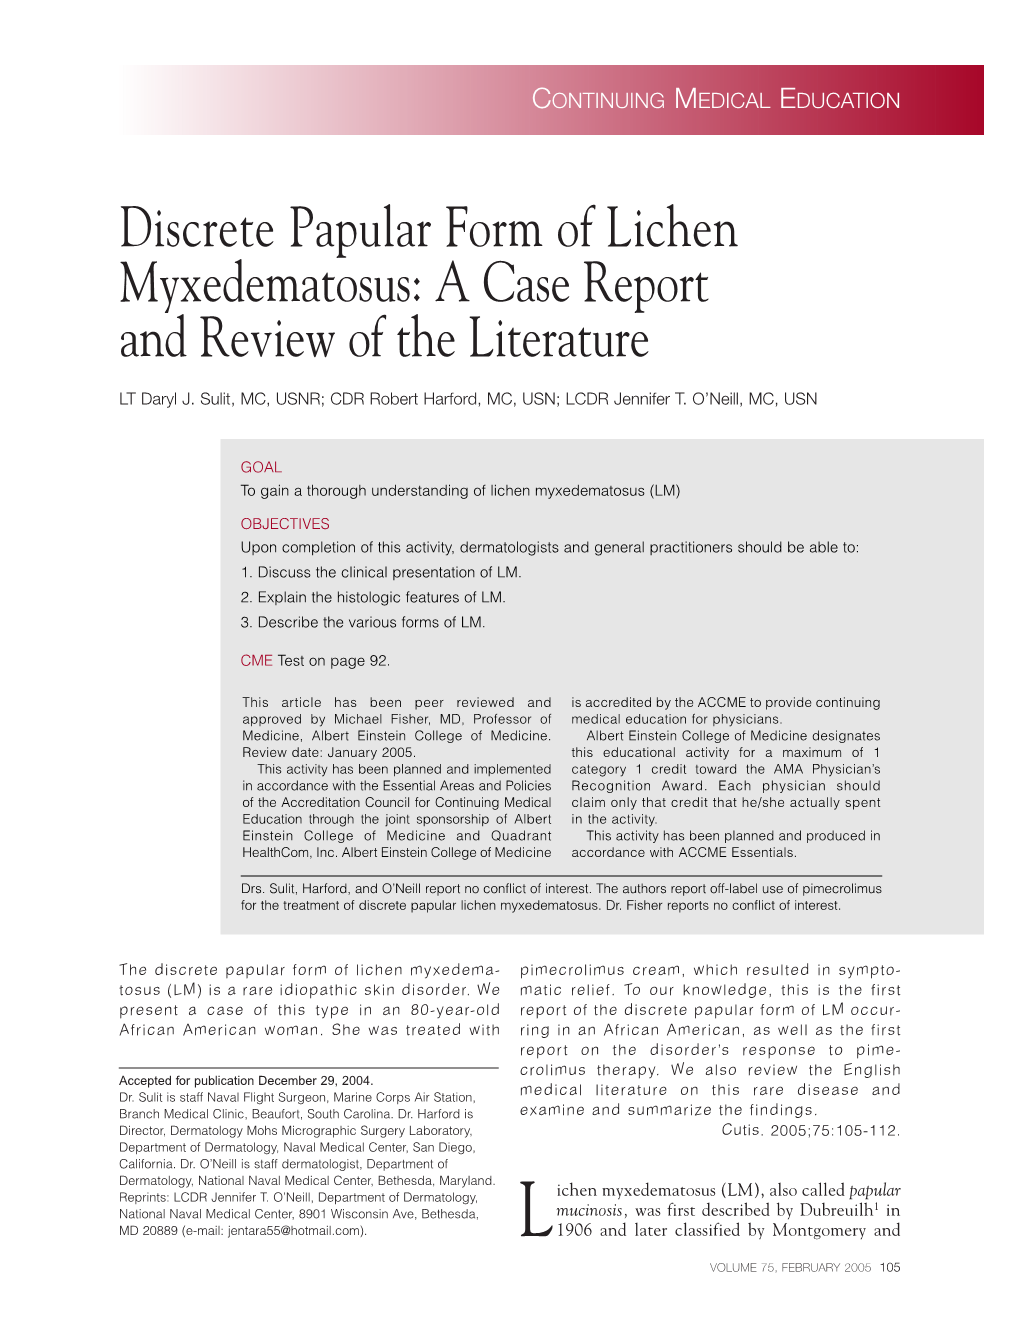 Discrete Papular Form of Lichen Myxedematosus: a Case Report and Review of the Literature